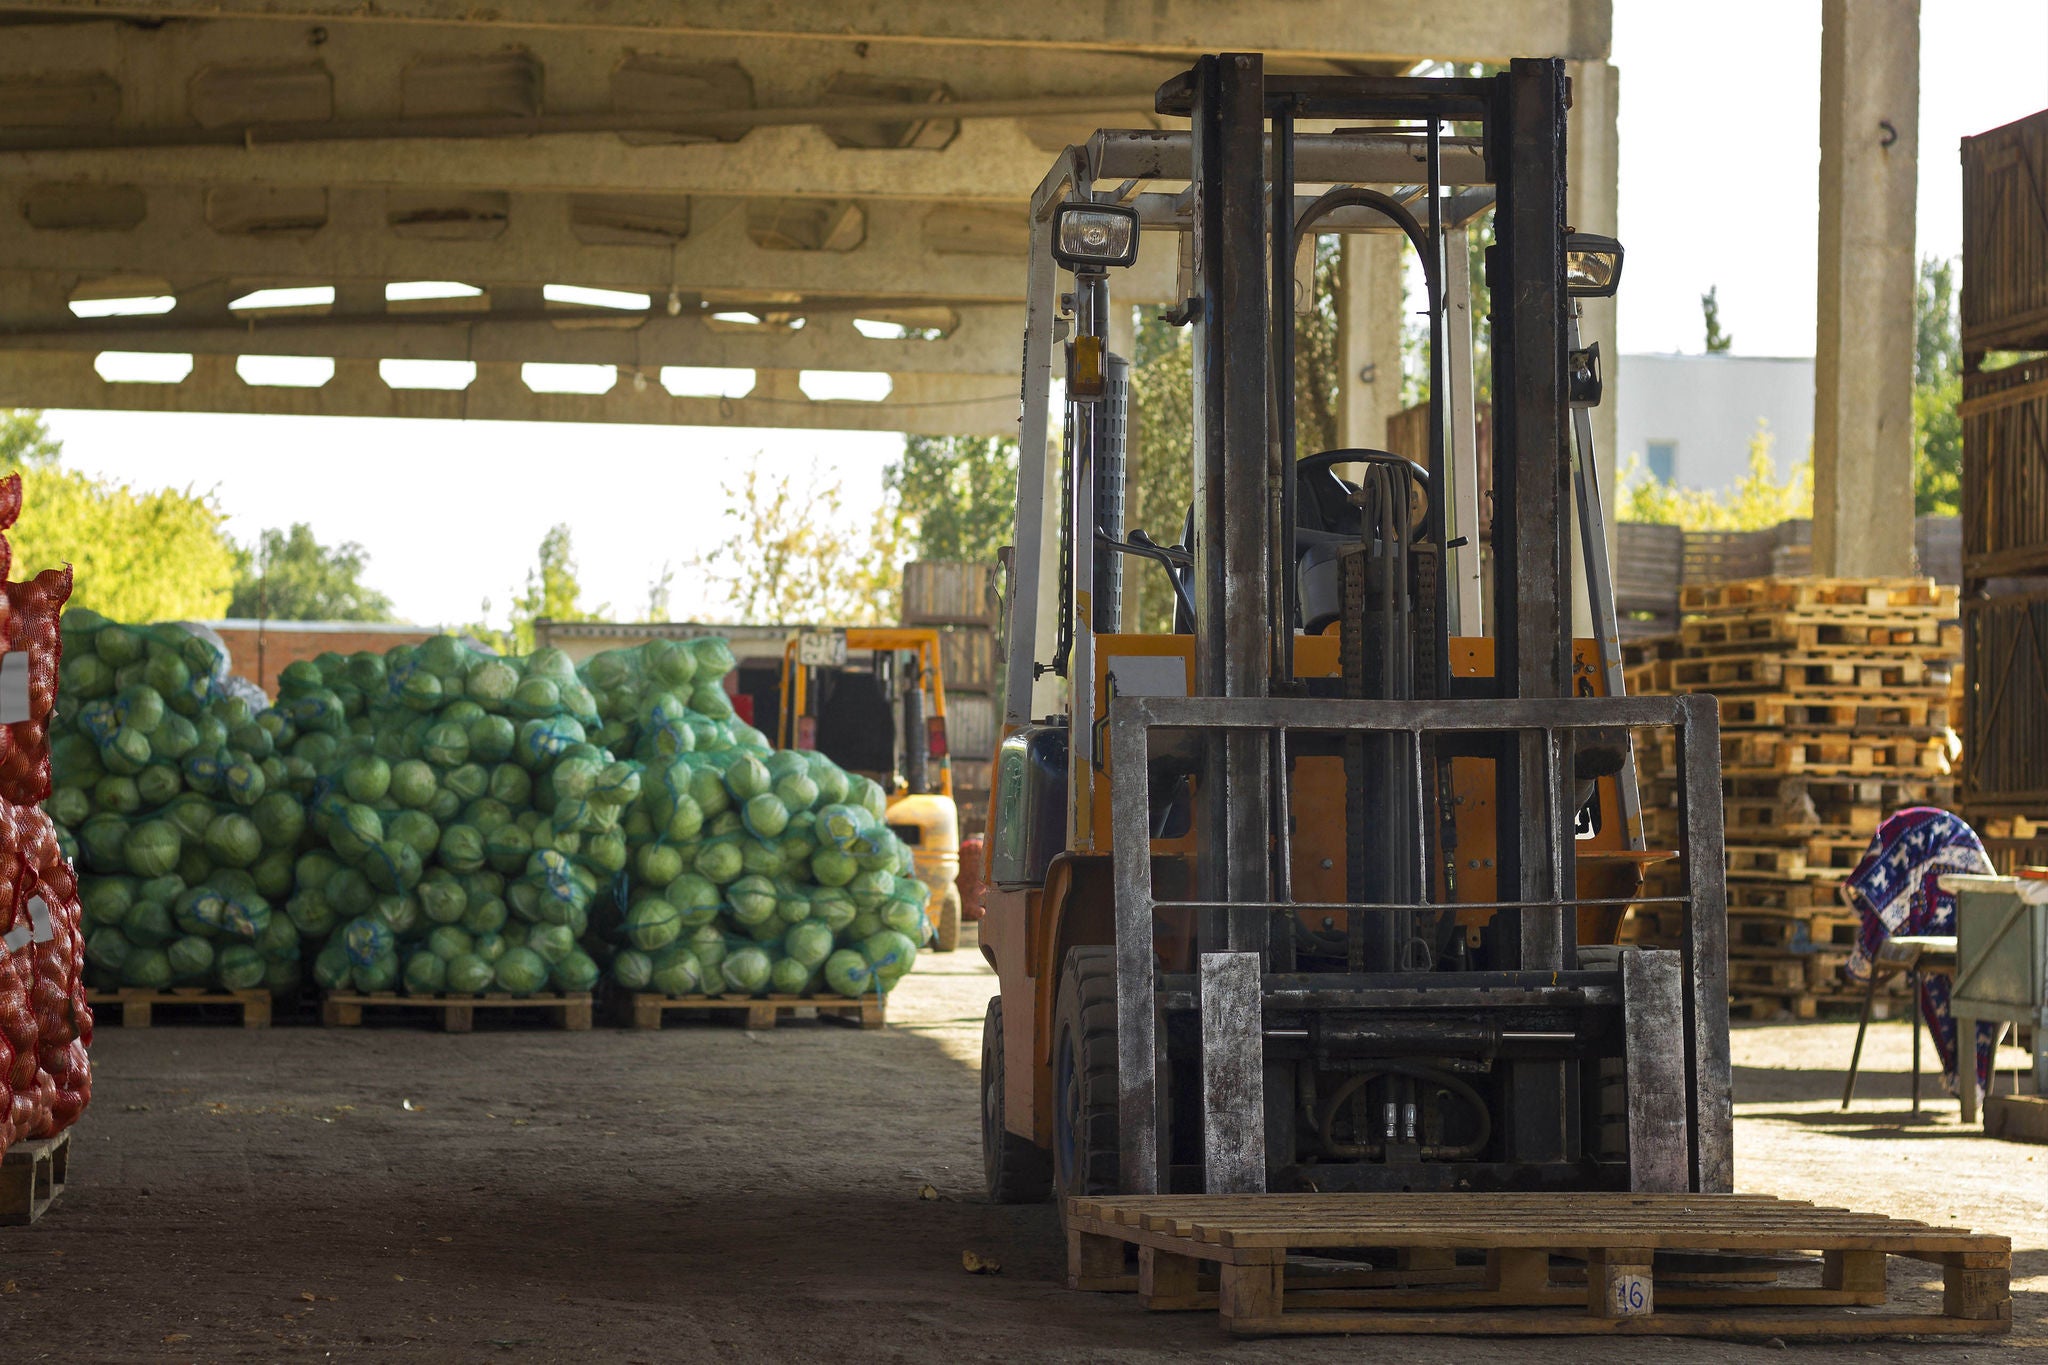 farm vegetable warehouse, harvesting, vegetables are bagged and stacked, forklift